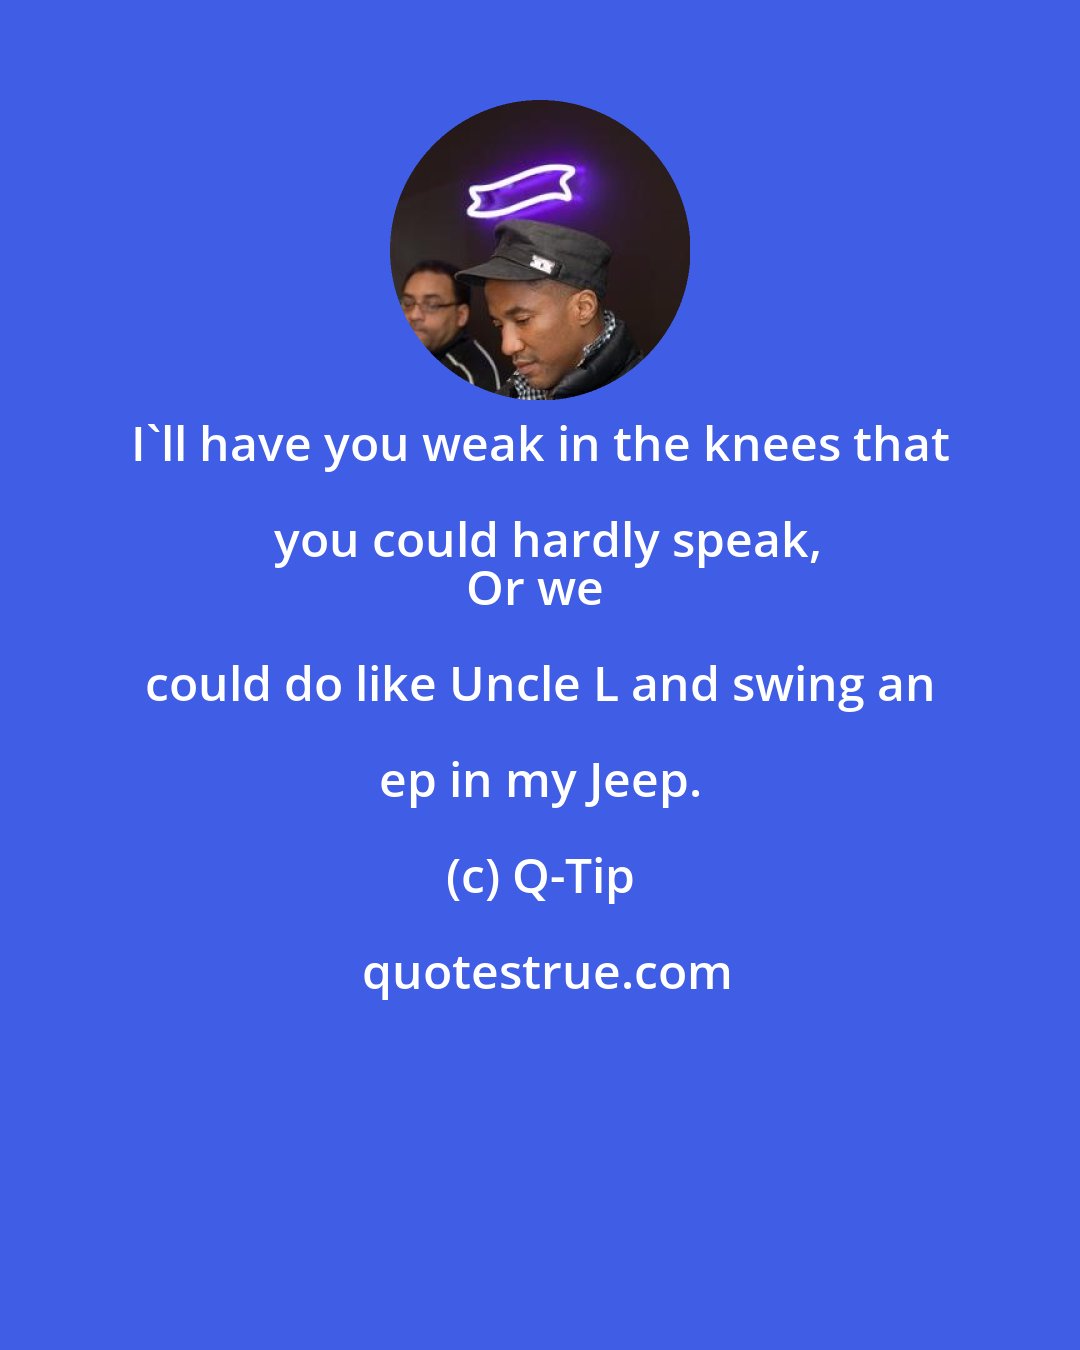 Q-Tip: I'll have you weak in the knees that you could hardly speak,
Or we could do like Uncle L and swing an ep in my Jeep.